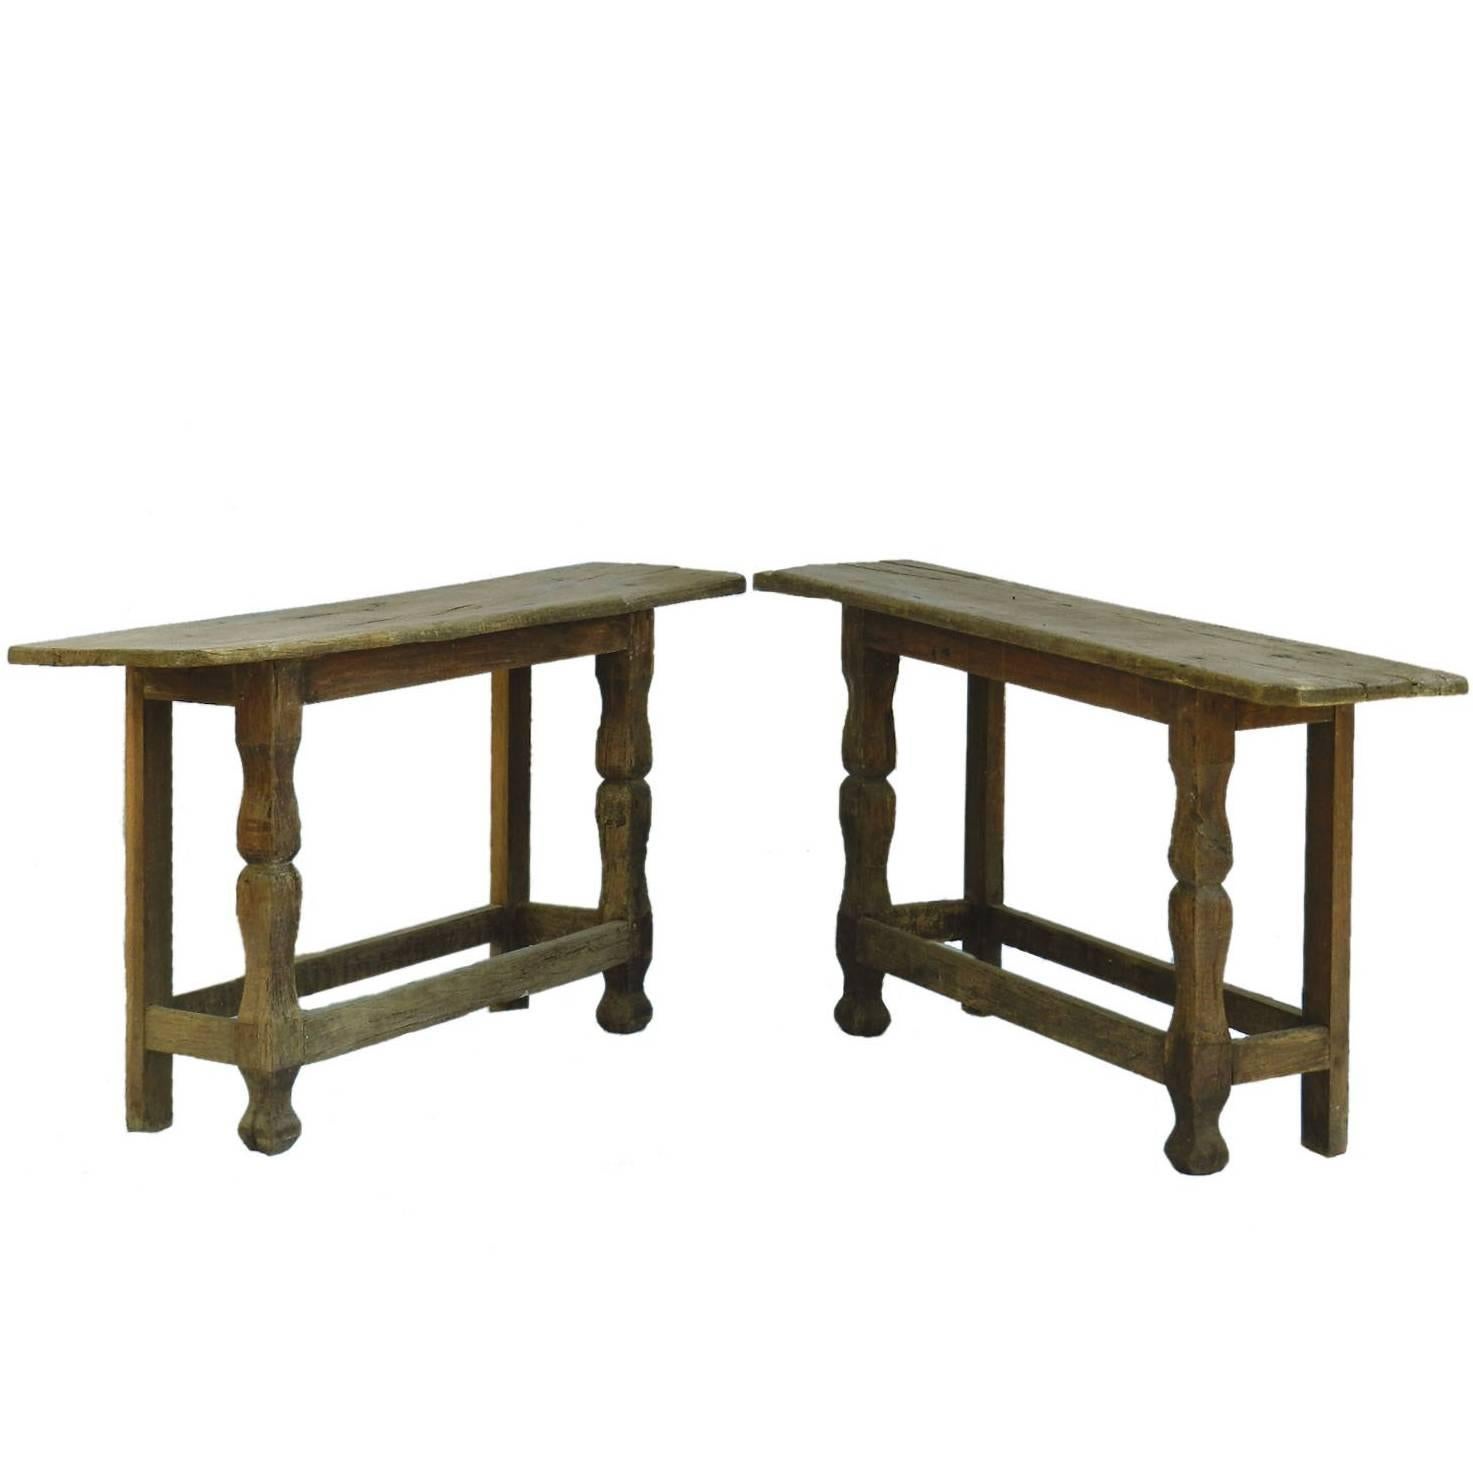 Pair of Console Tables Primitive Folk Art Brutalist, French Country House